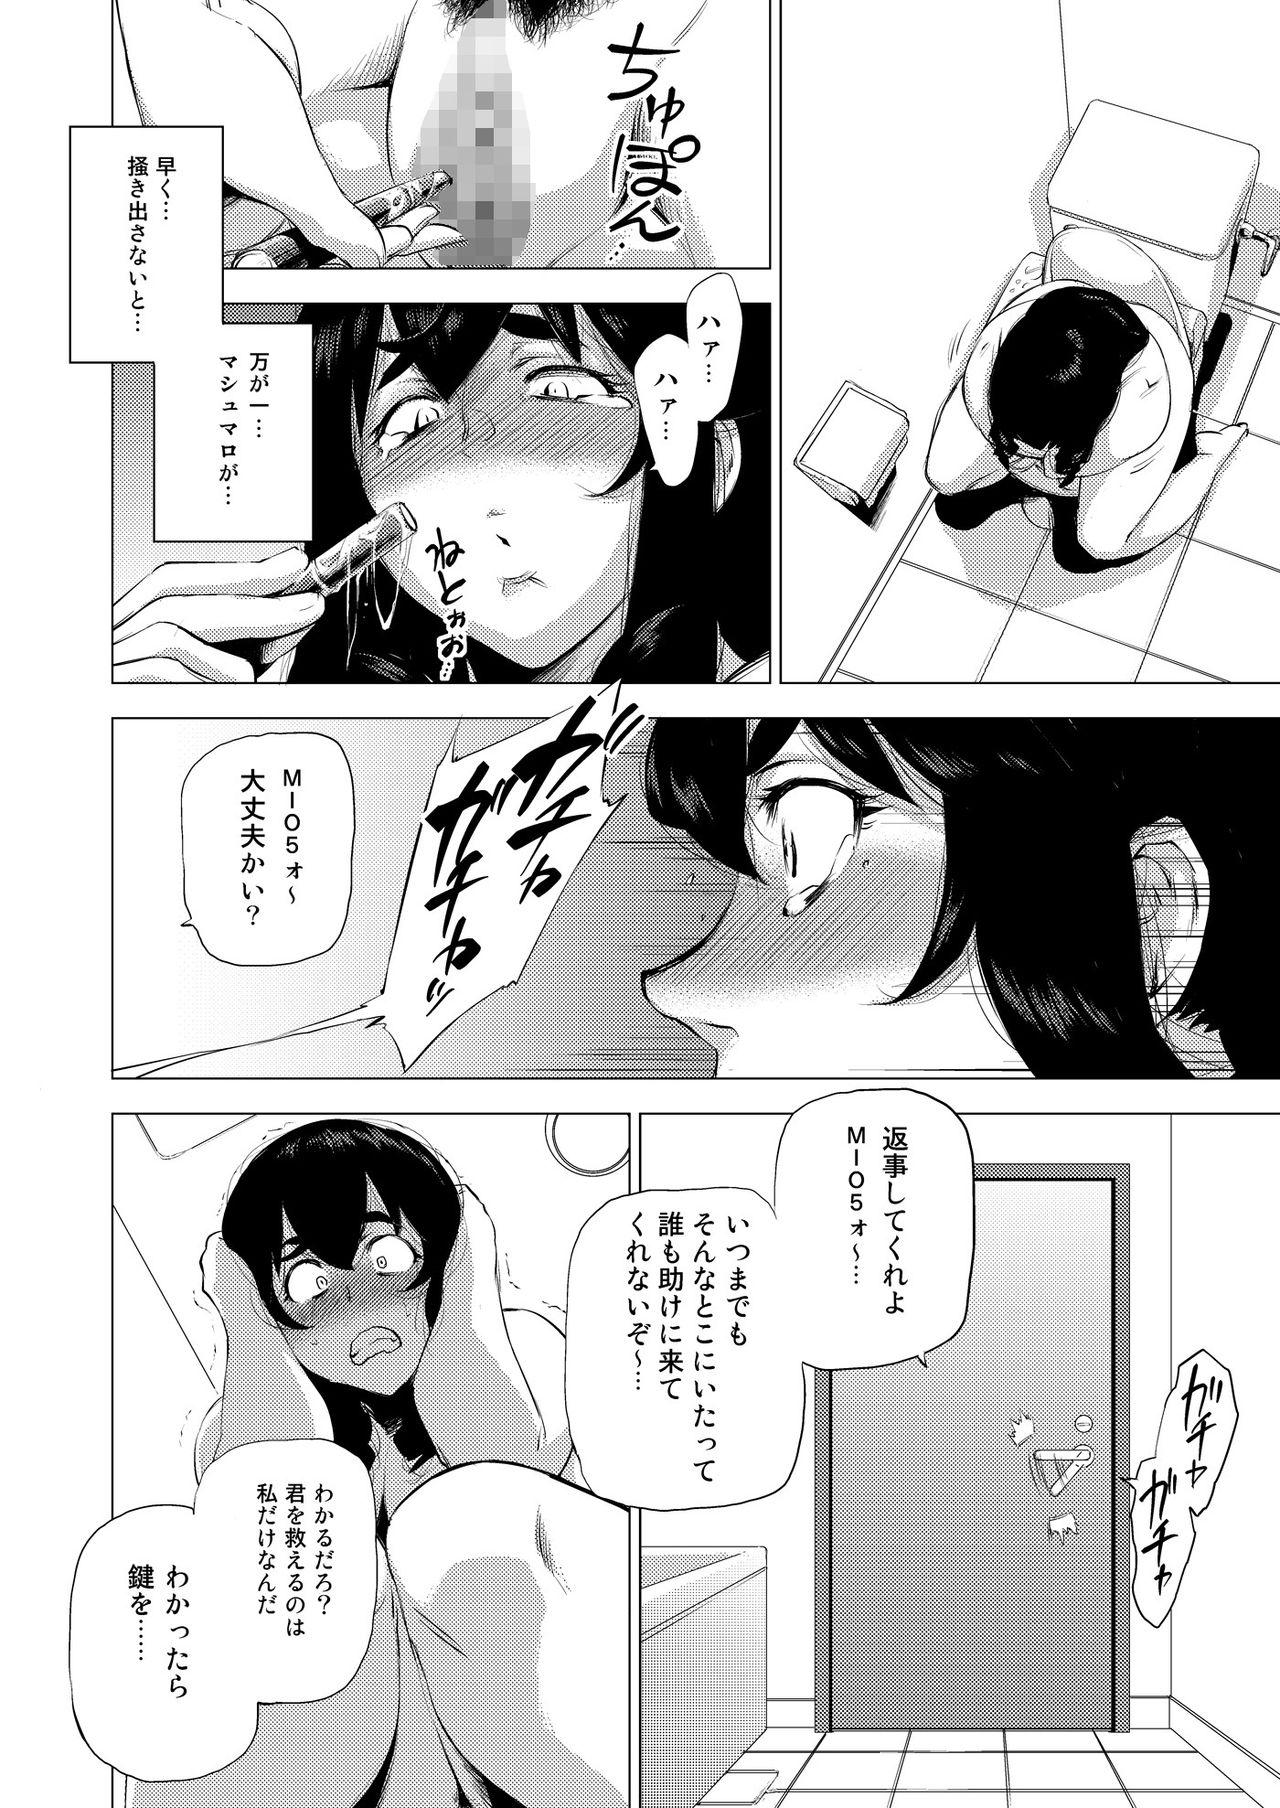 This MIO5 HaraMarsh - Ojisan to marshmallow Old Young - Page 11